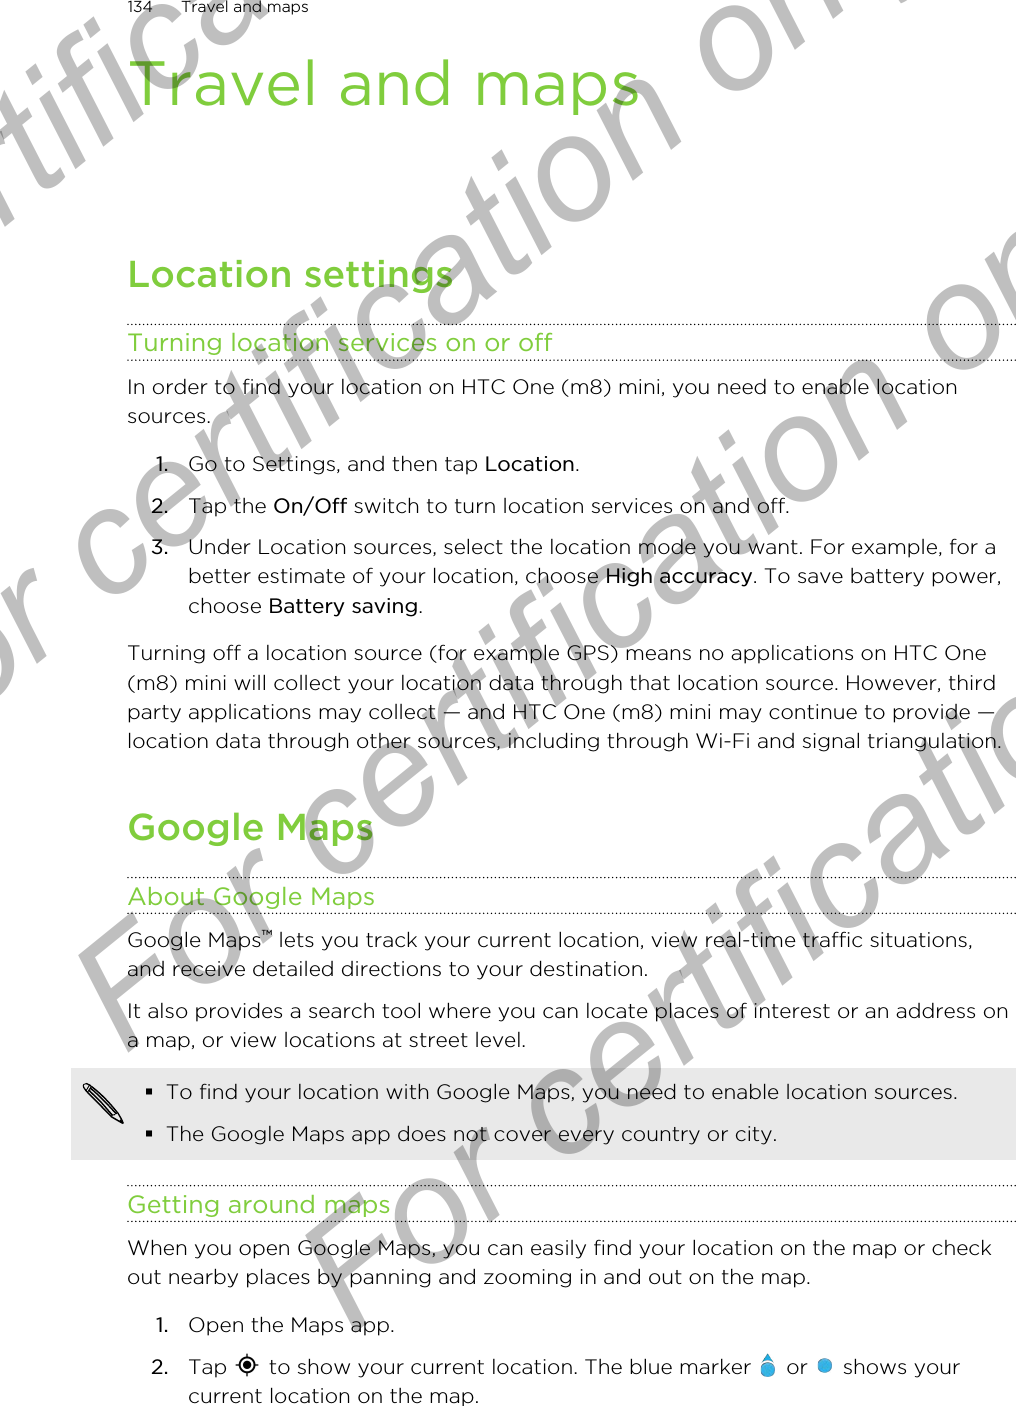 Travel and mapsLocation settingsTurning location services on or offIn order to find your location on HTC One (m8) mini, you need to enable locationsources.1. Go to Settings, and then tap Location.2. Tap the On/Off switch to turn location services on and off.3. Under Location sources, select the location mode you want. For example, for abetter estimate of your location, choose High accuracy. To save battery power,choose Battery saving.Turning off a location source (for example GPS) means no applications on HTC One(m8) mini will collect your location data through that location source. However, thirdparty applications may collect — and HTC One (m8) mini may continue to provide —location data through other sources, including through Wi-Fi and signal triangulation.Google MapsAbout Google MapsGoogle Maps™ lets you track your current location, view real-time traffic situations,and receive detailed directions to your destination.It also provides a search tool where you can locate places of interest or an address ona map, or view locations at street level.§To find your location with Google Maps, you need to enable location sources.§The Google Maps app does not cover every country or city.Getting around mapsWhen you open Google Maps, you can easily find your location on the map or checkout nearby places by panning and zooming in and out on the map.1. Open the Maps app.2. Tap   to show your current location. The blue marker   or   shows yourcurrent location on the map.134 Travel and mapsFor certification  For certification only  For certification only  For certification only 